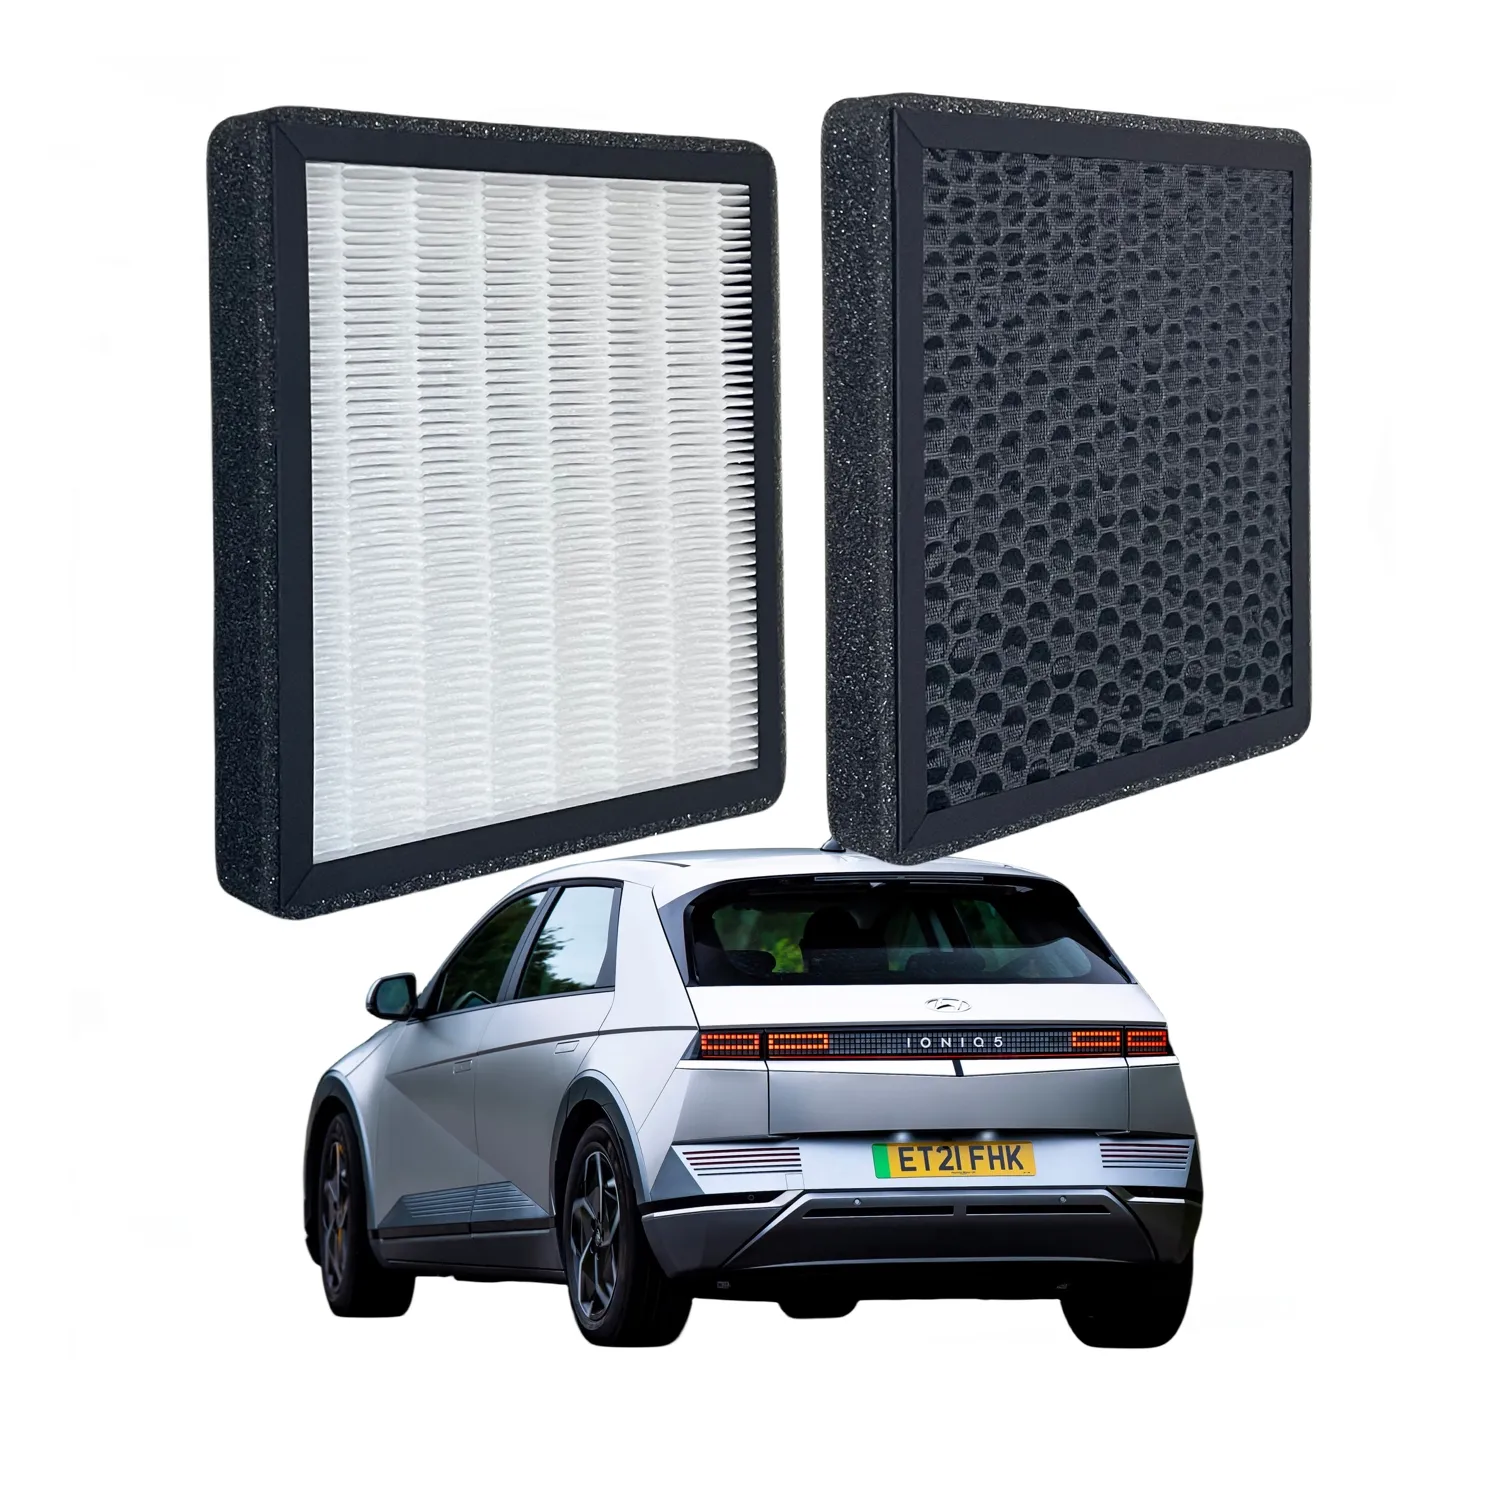 XTechnor HEPA Cabin Air Filter For Hyundai Ioniq 5 2022,2023,2024,Automotive Replacement Air Intake Filter Accessories